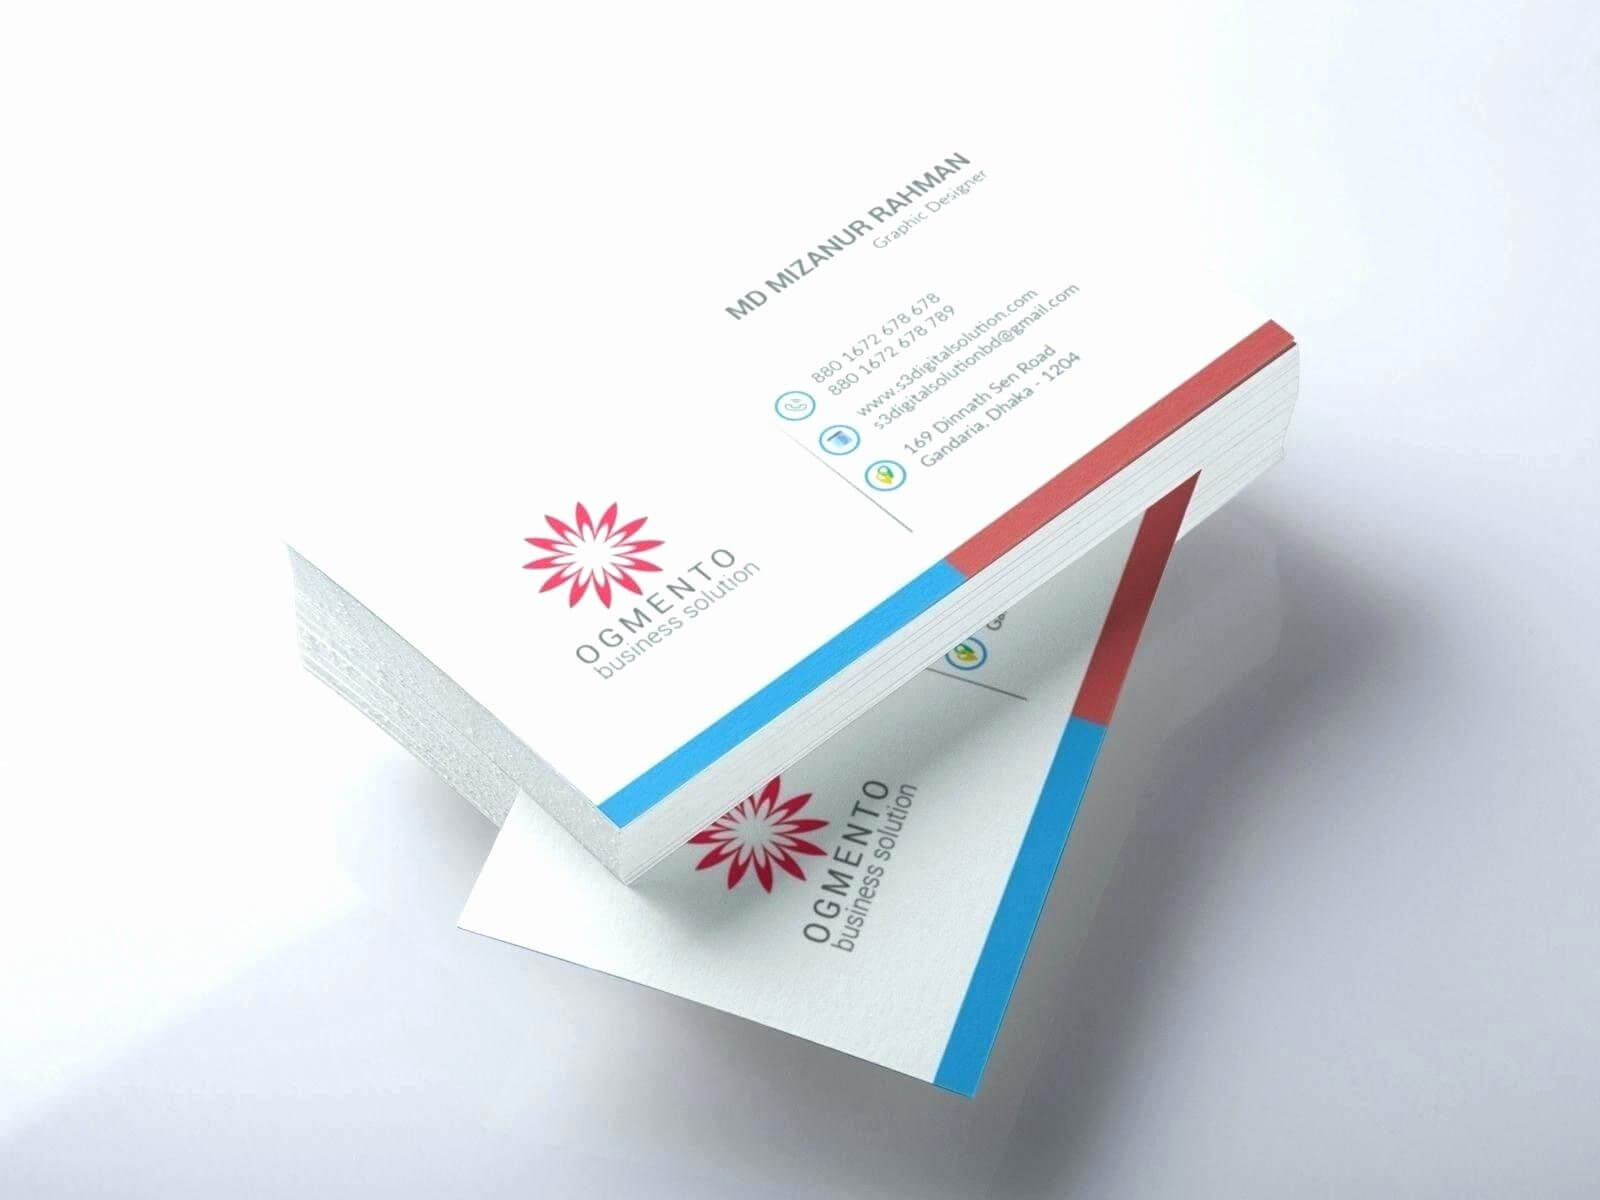 Pinanggunstore On Business Cards Intended For 2 Sided Business Card Template Word